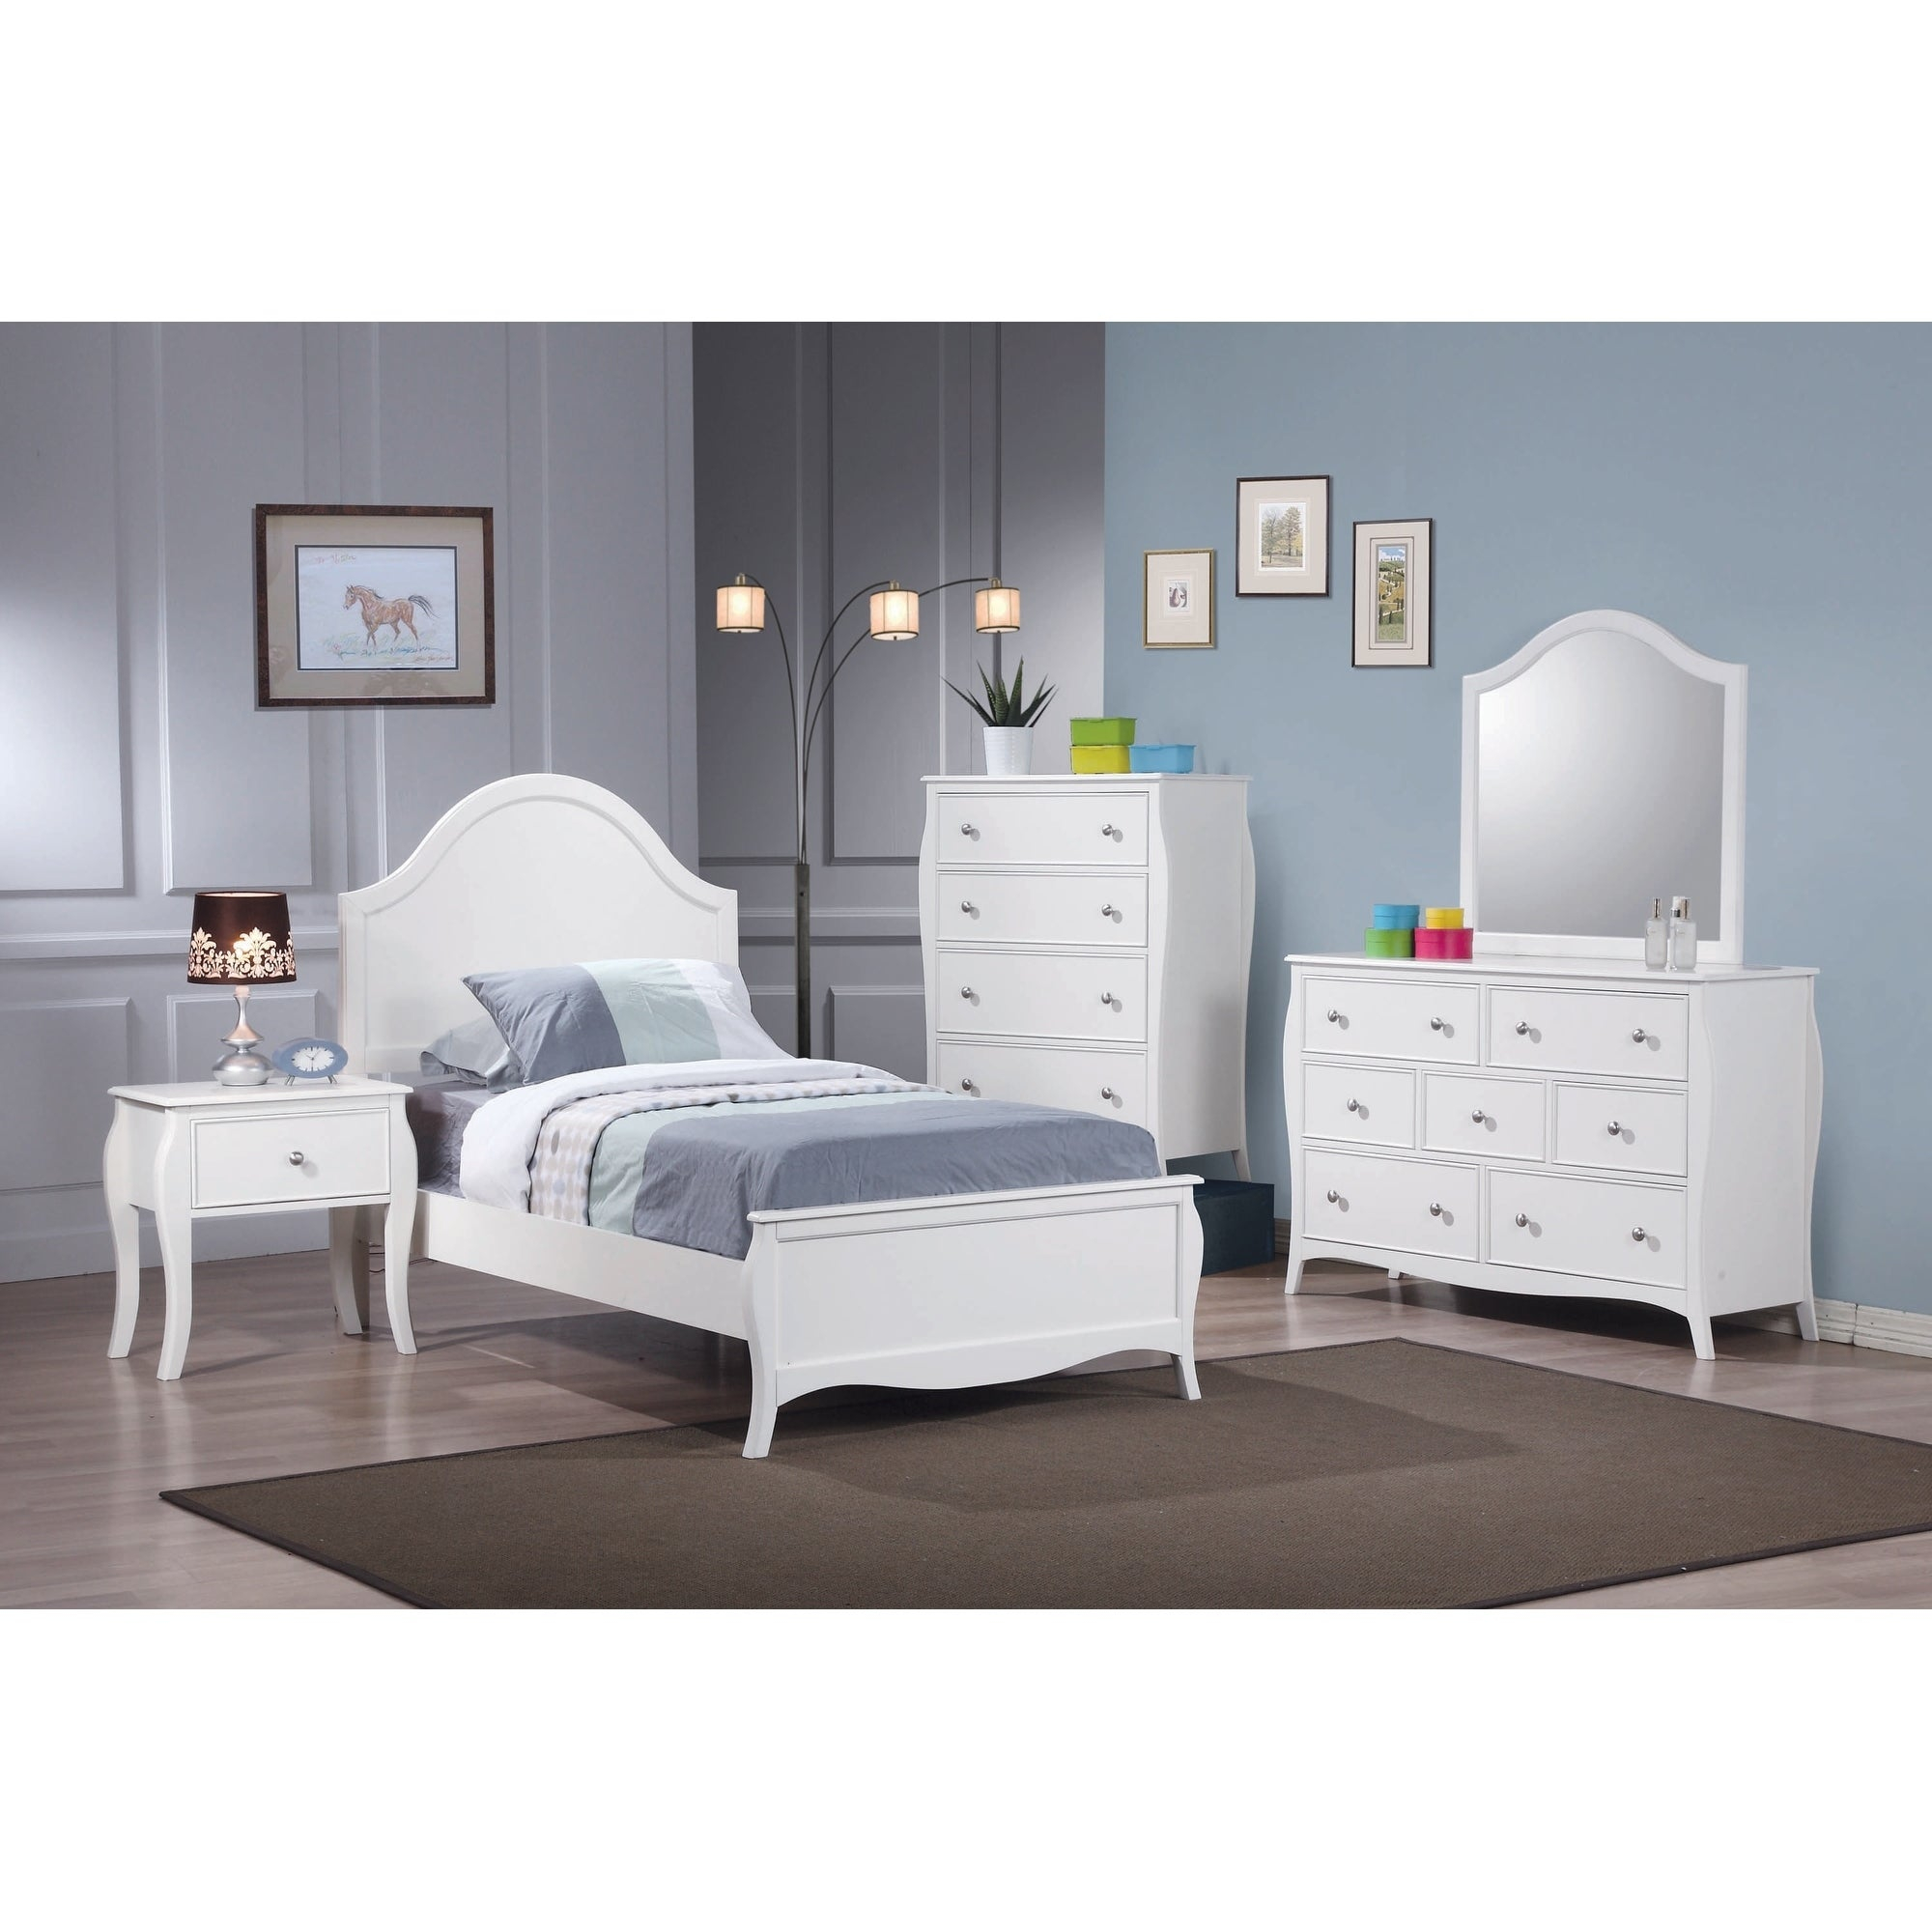 Porch Den Revere French Country White 5 Piece Bedroom Set pertaining to sizing 2000 X 2000